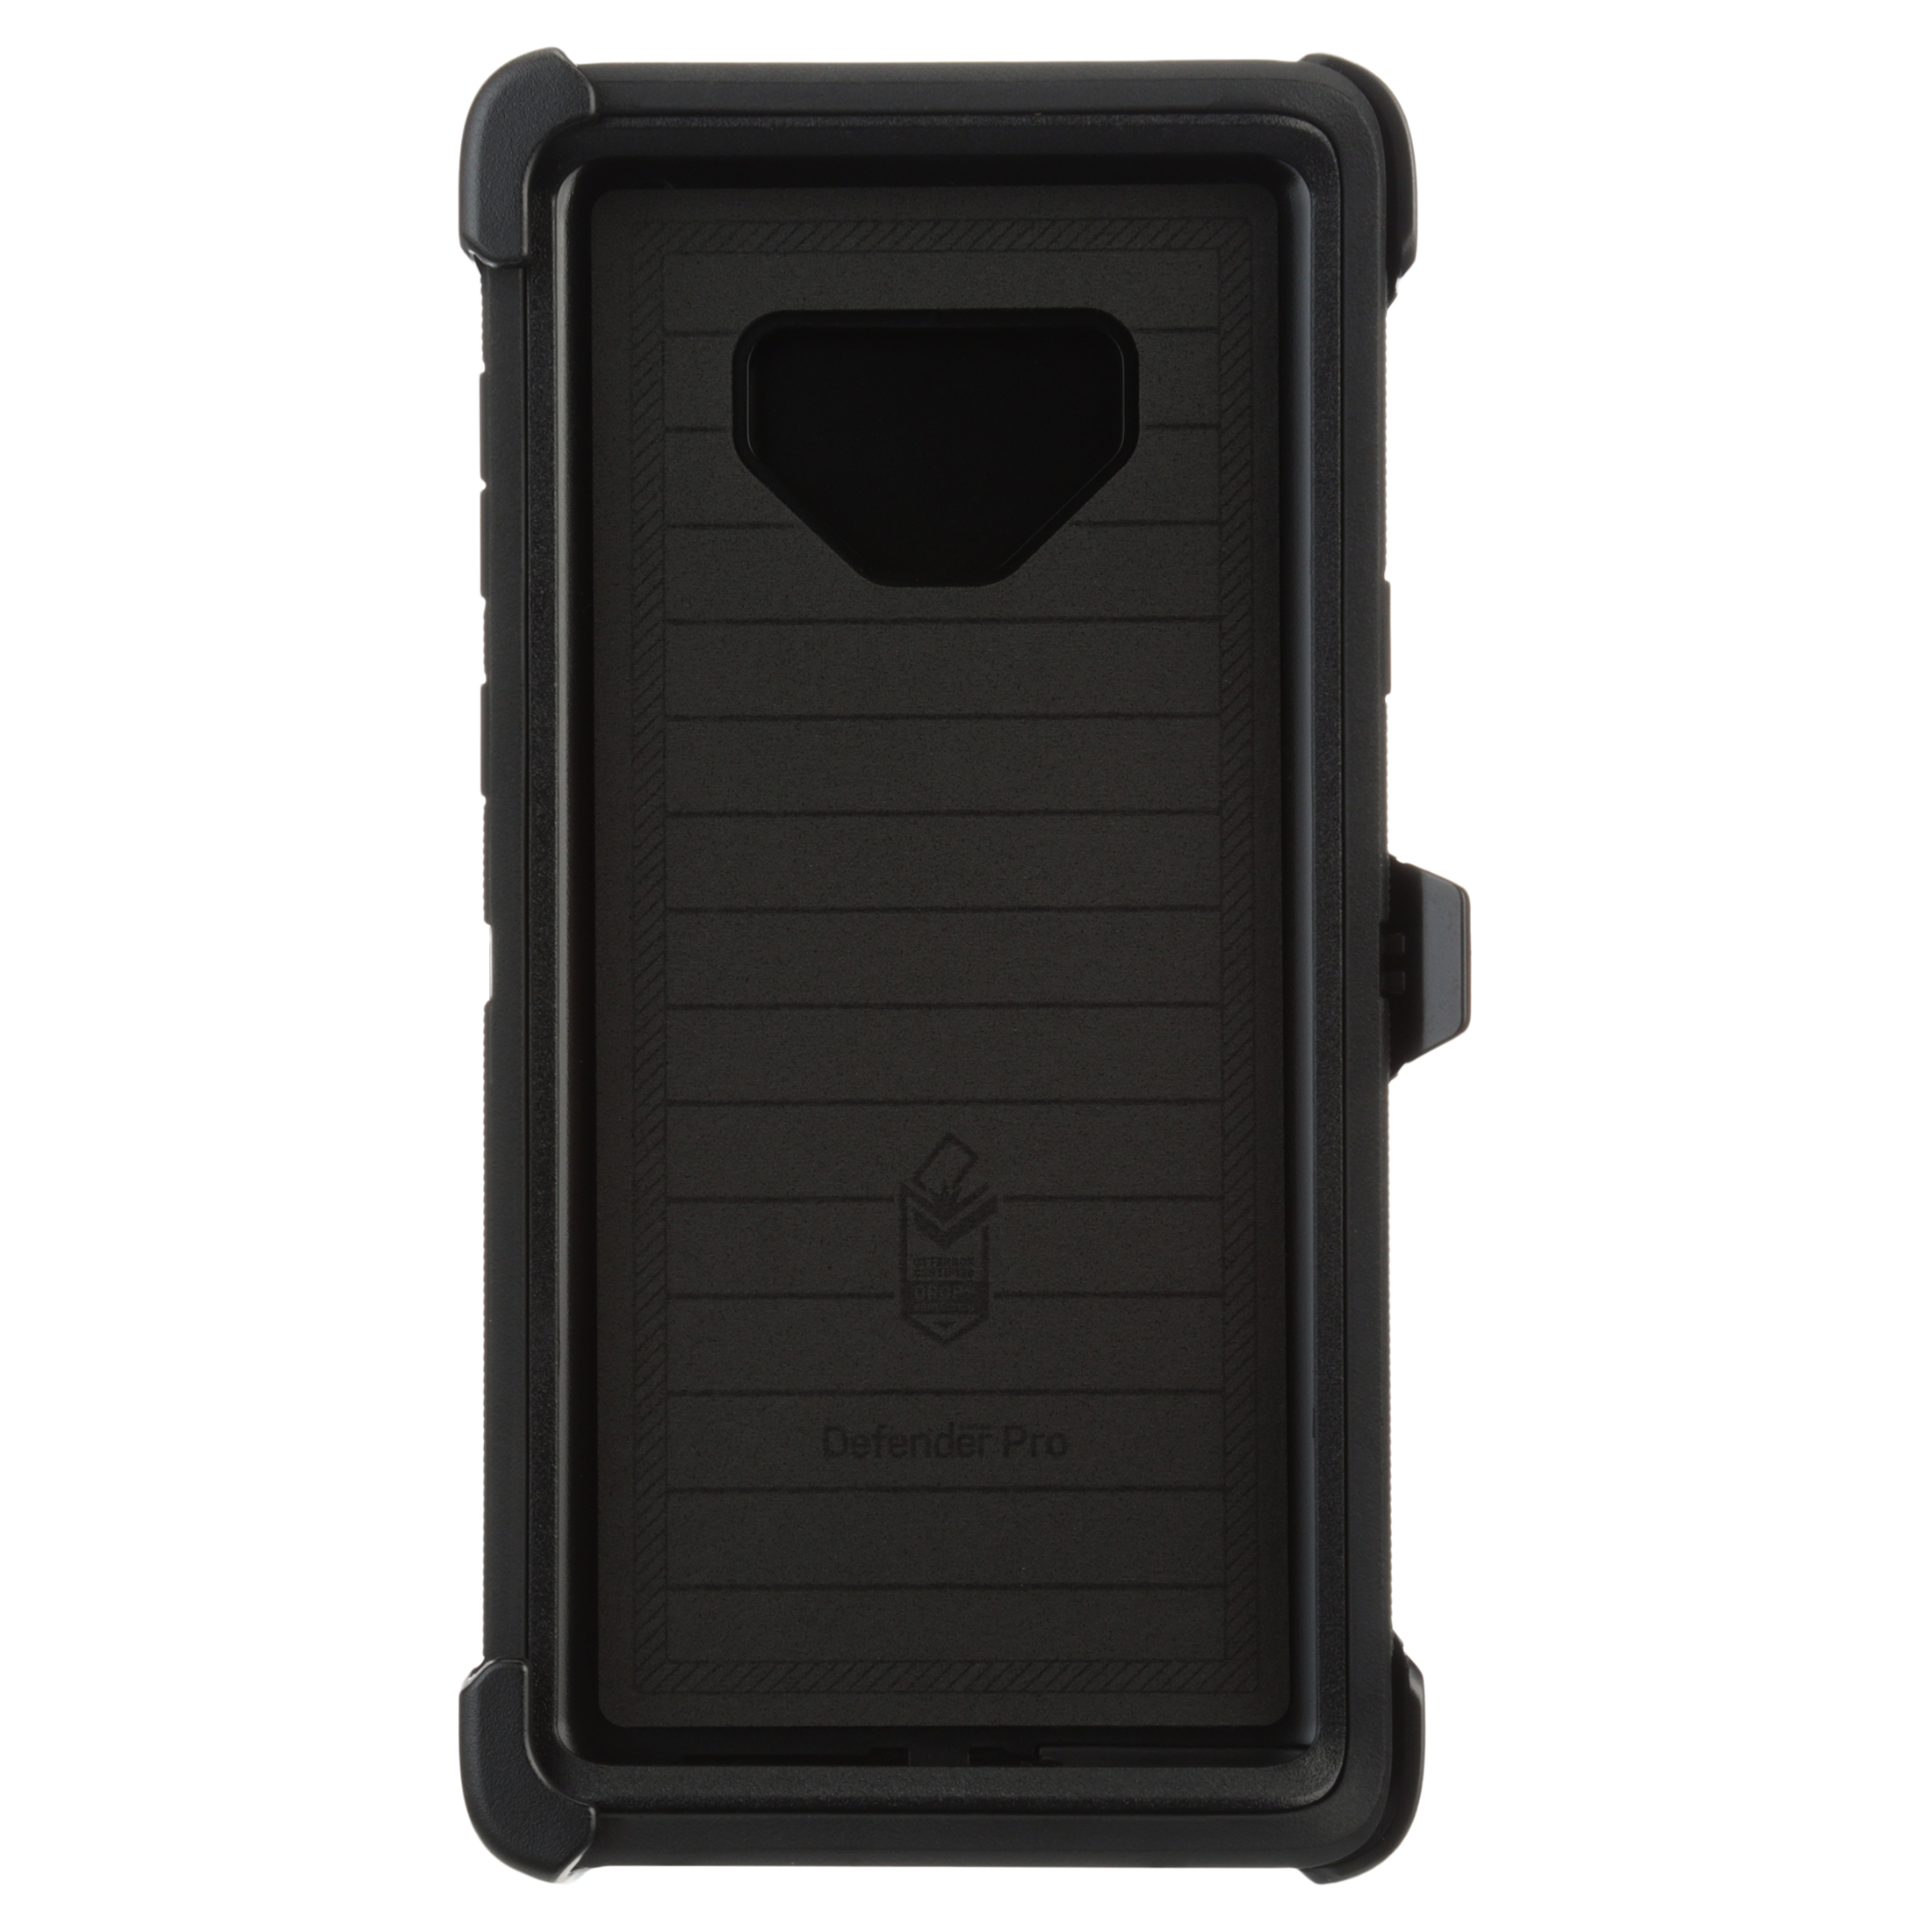 OtterBox Defender Series Pro Phone Case for Samsung Galaxy Note 9 - Black - image 5 of 10